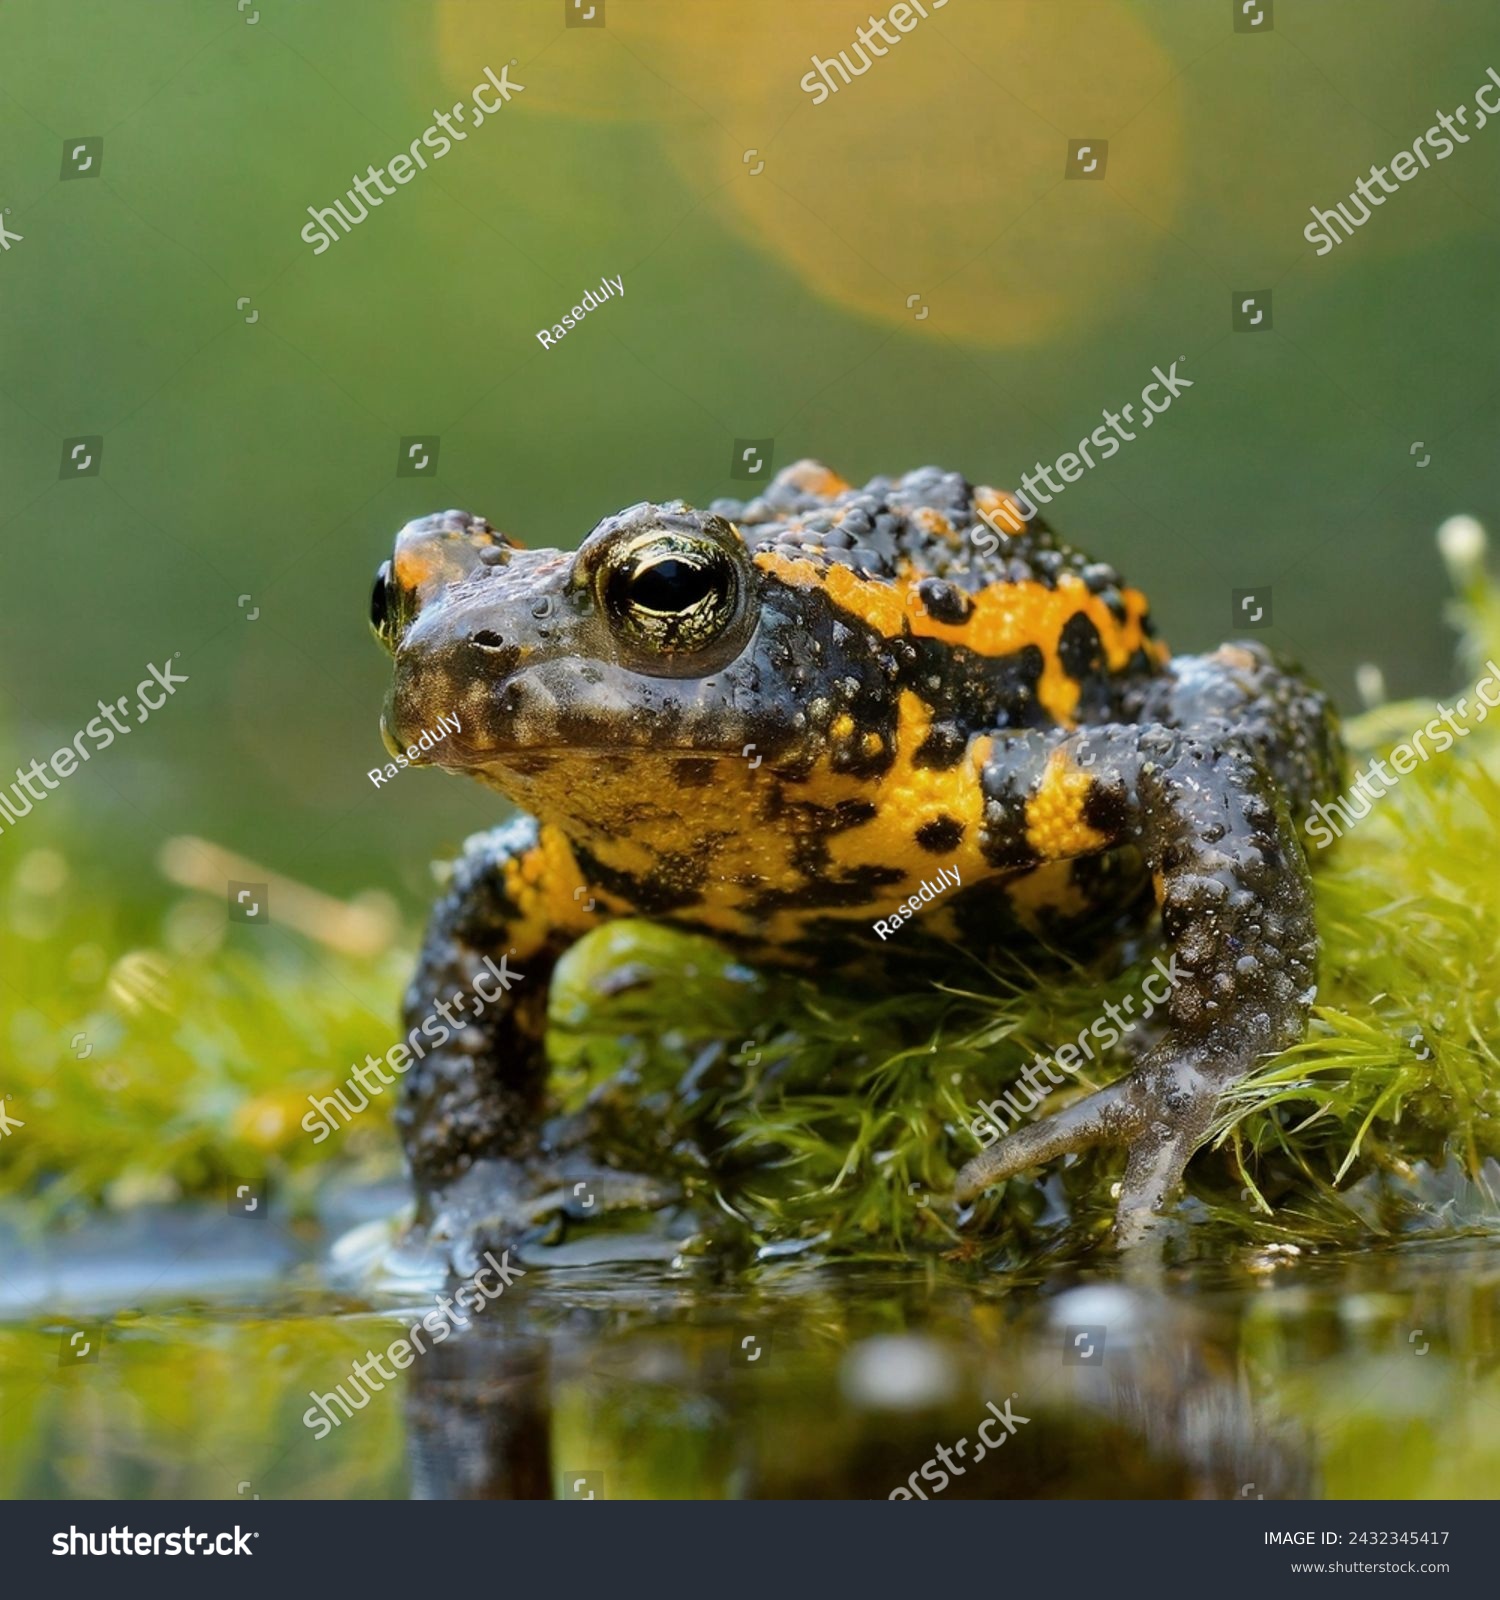 Yellow-bellied Toad Marsh's Golden Guardian #2432345417